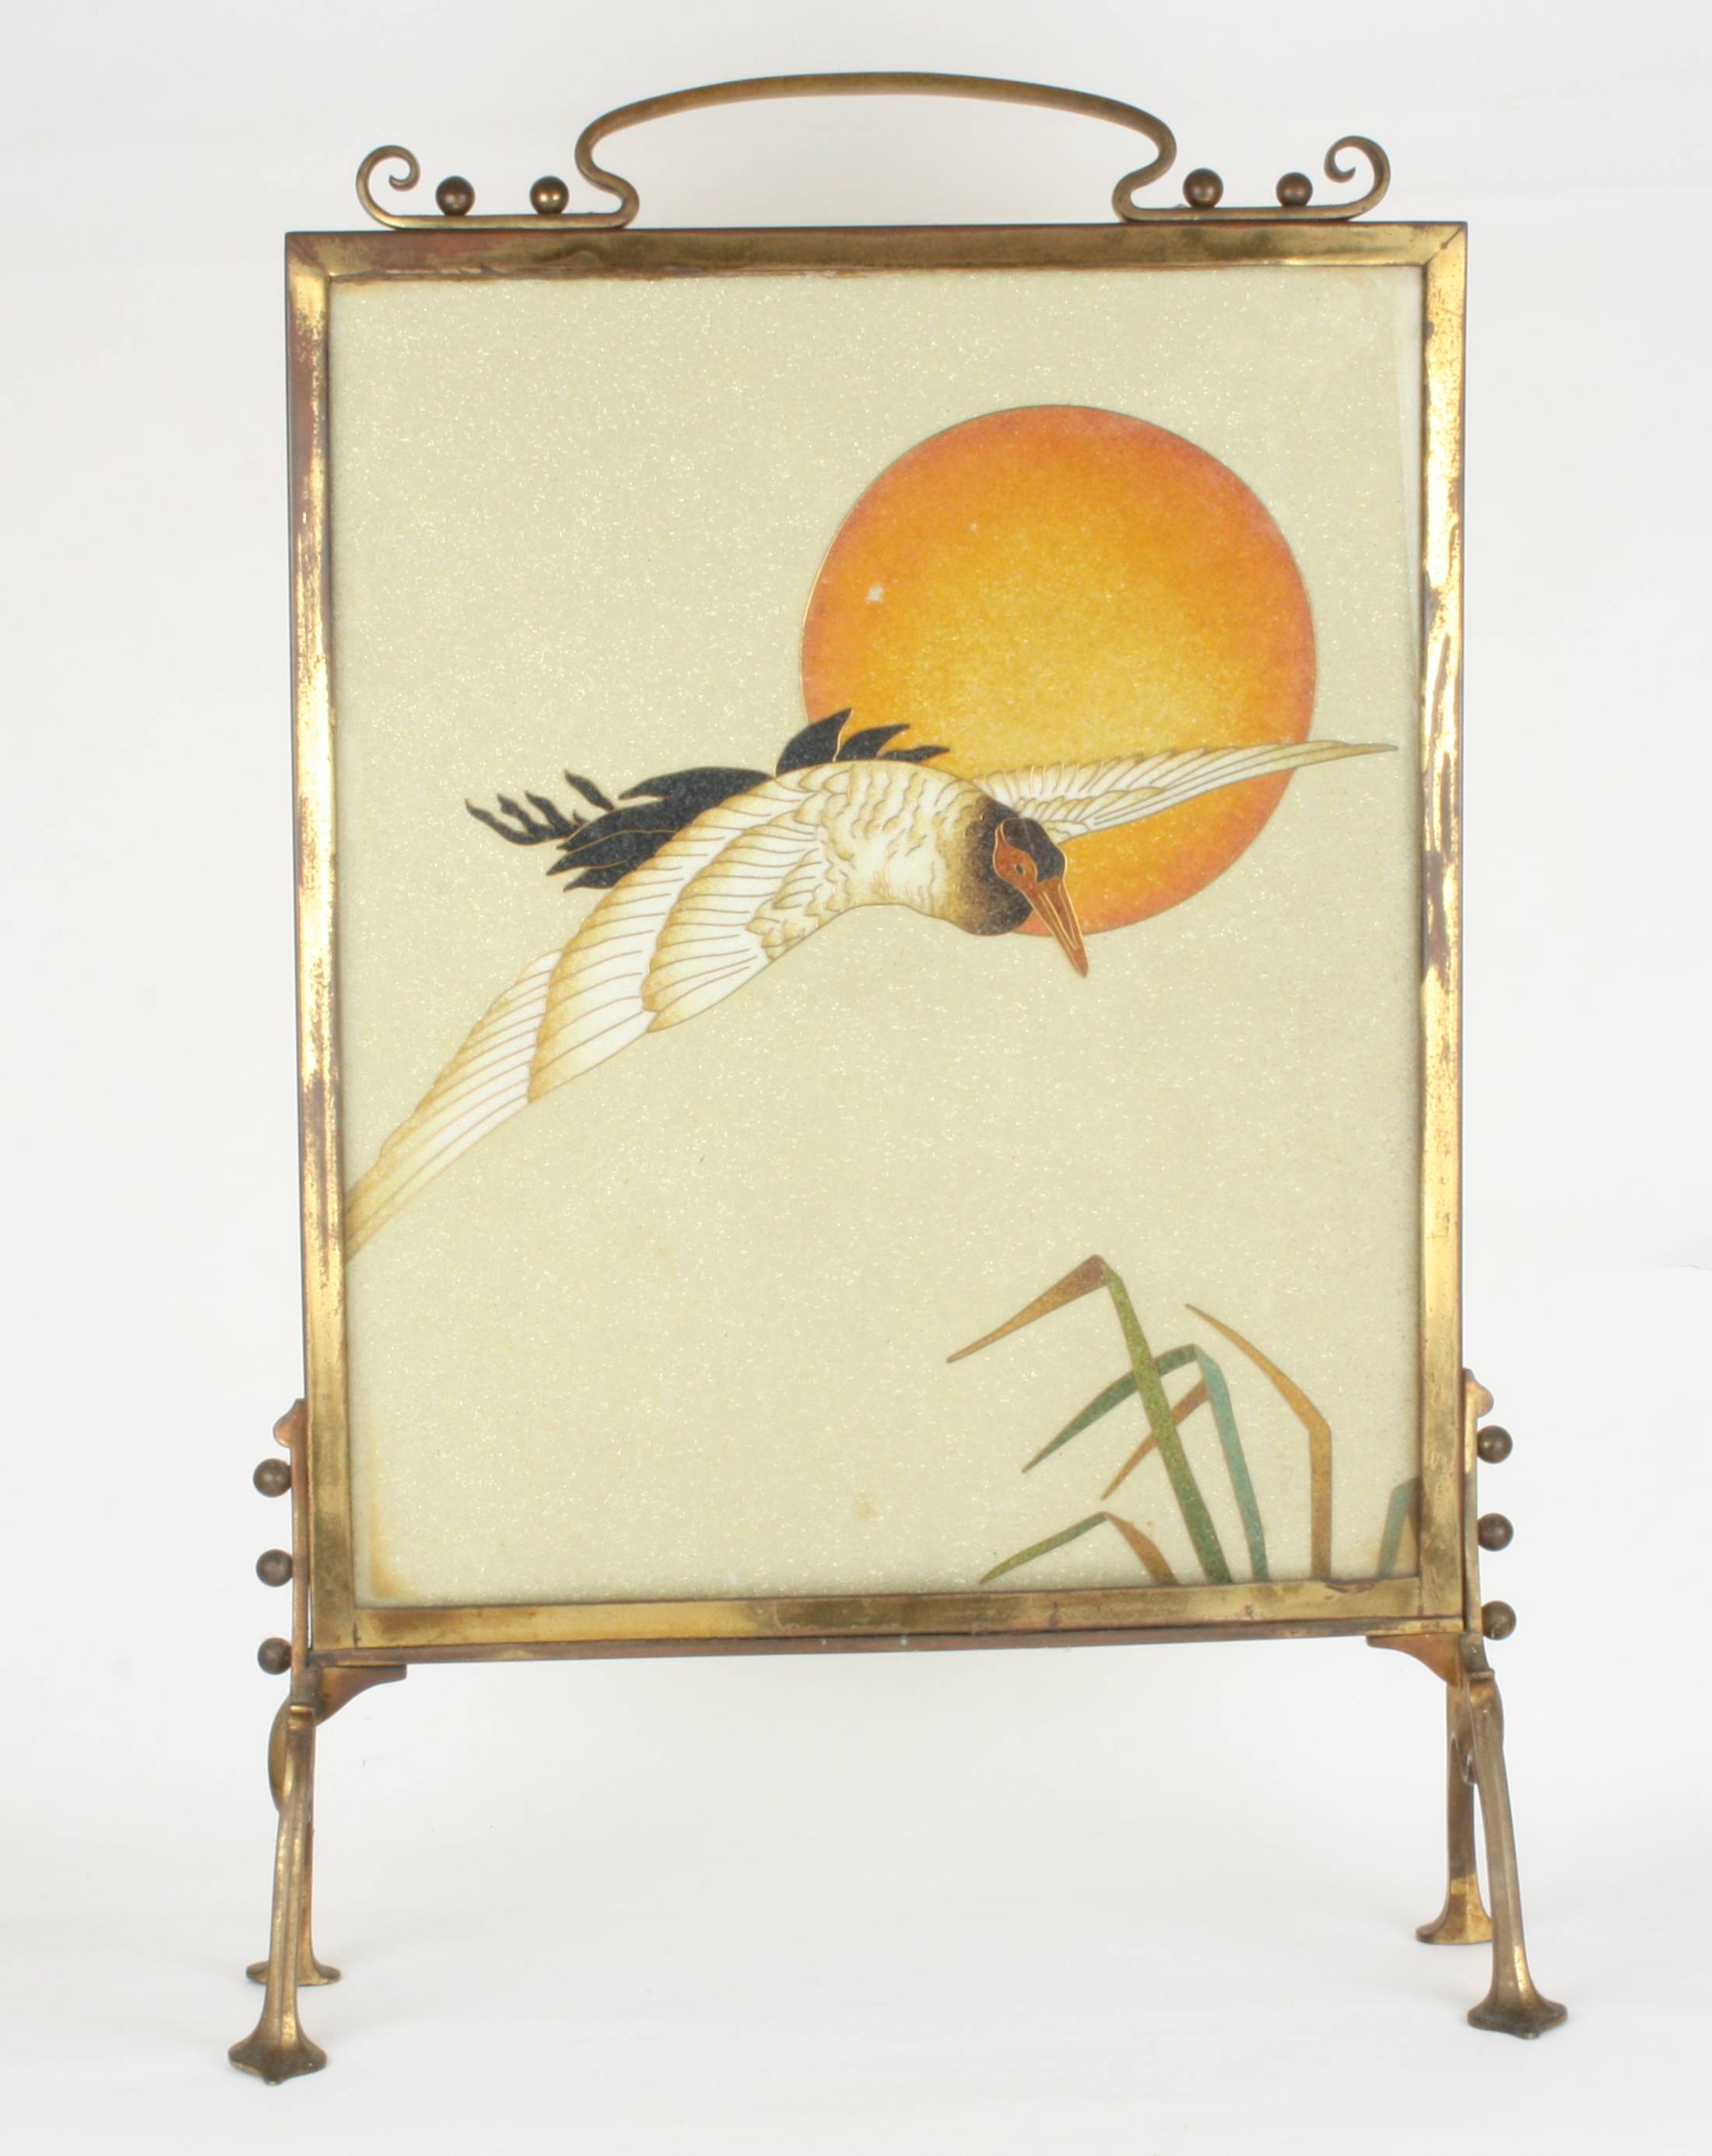 An Art Nouveau beadwork fire screen
first quarter 20th century,
the image on both sides depicting